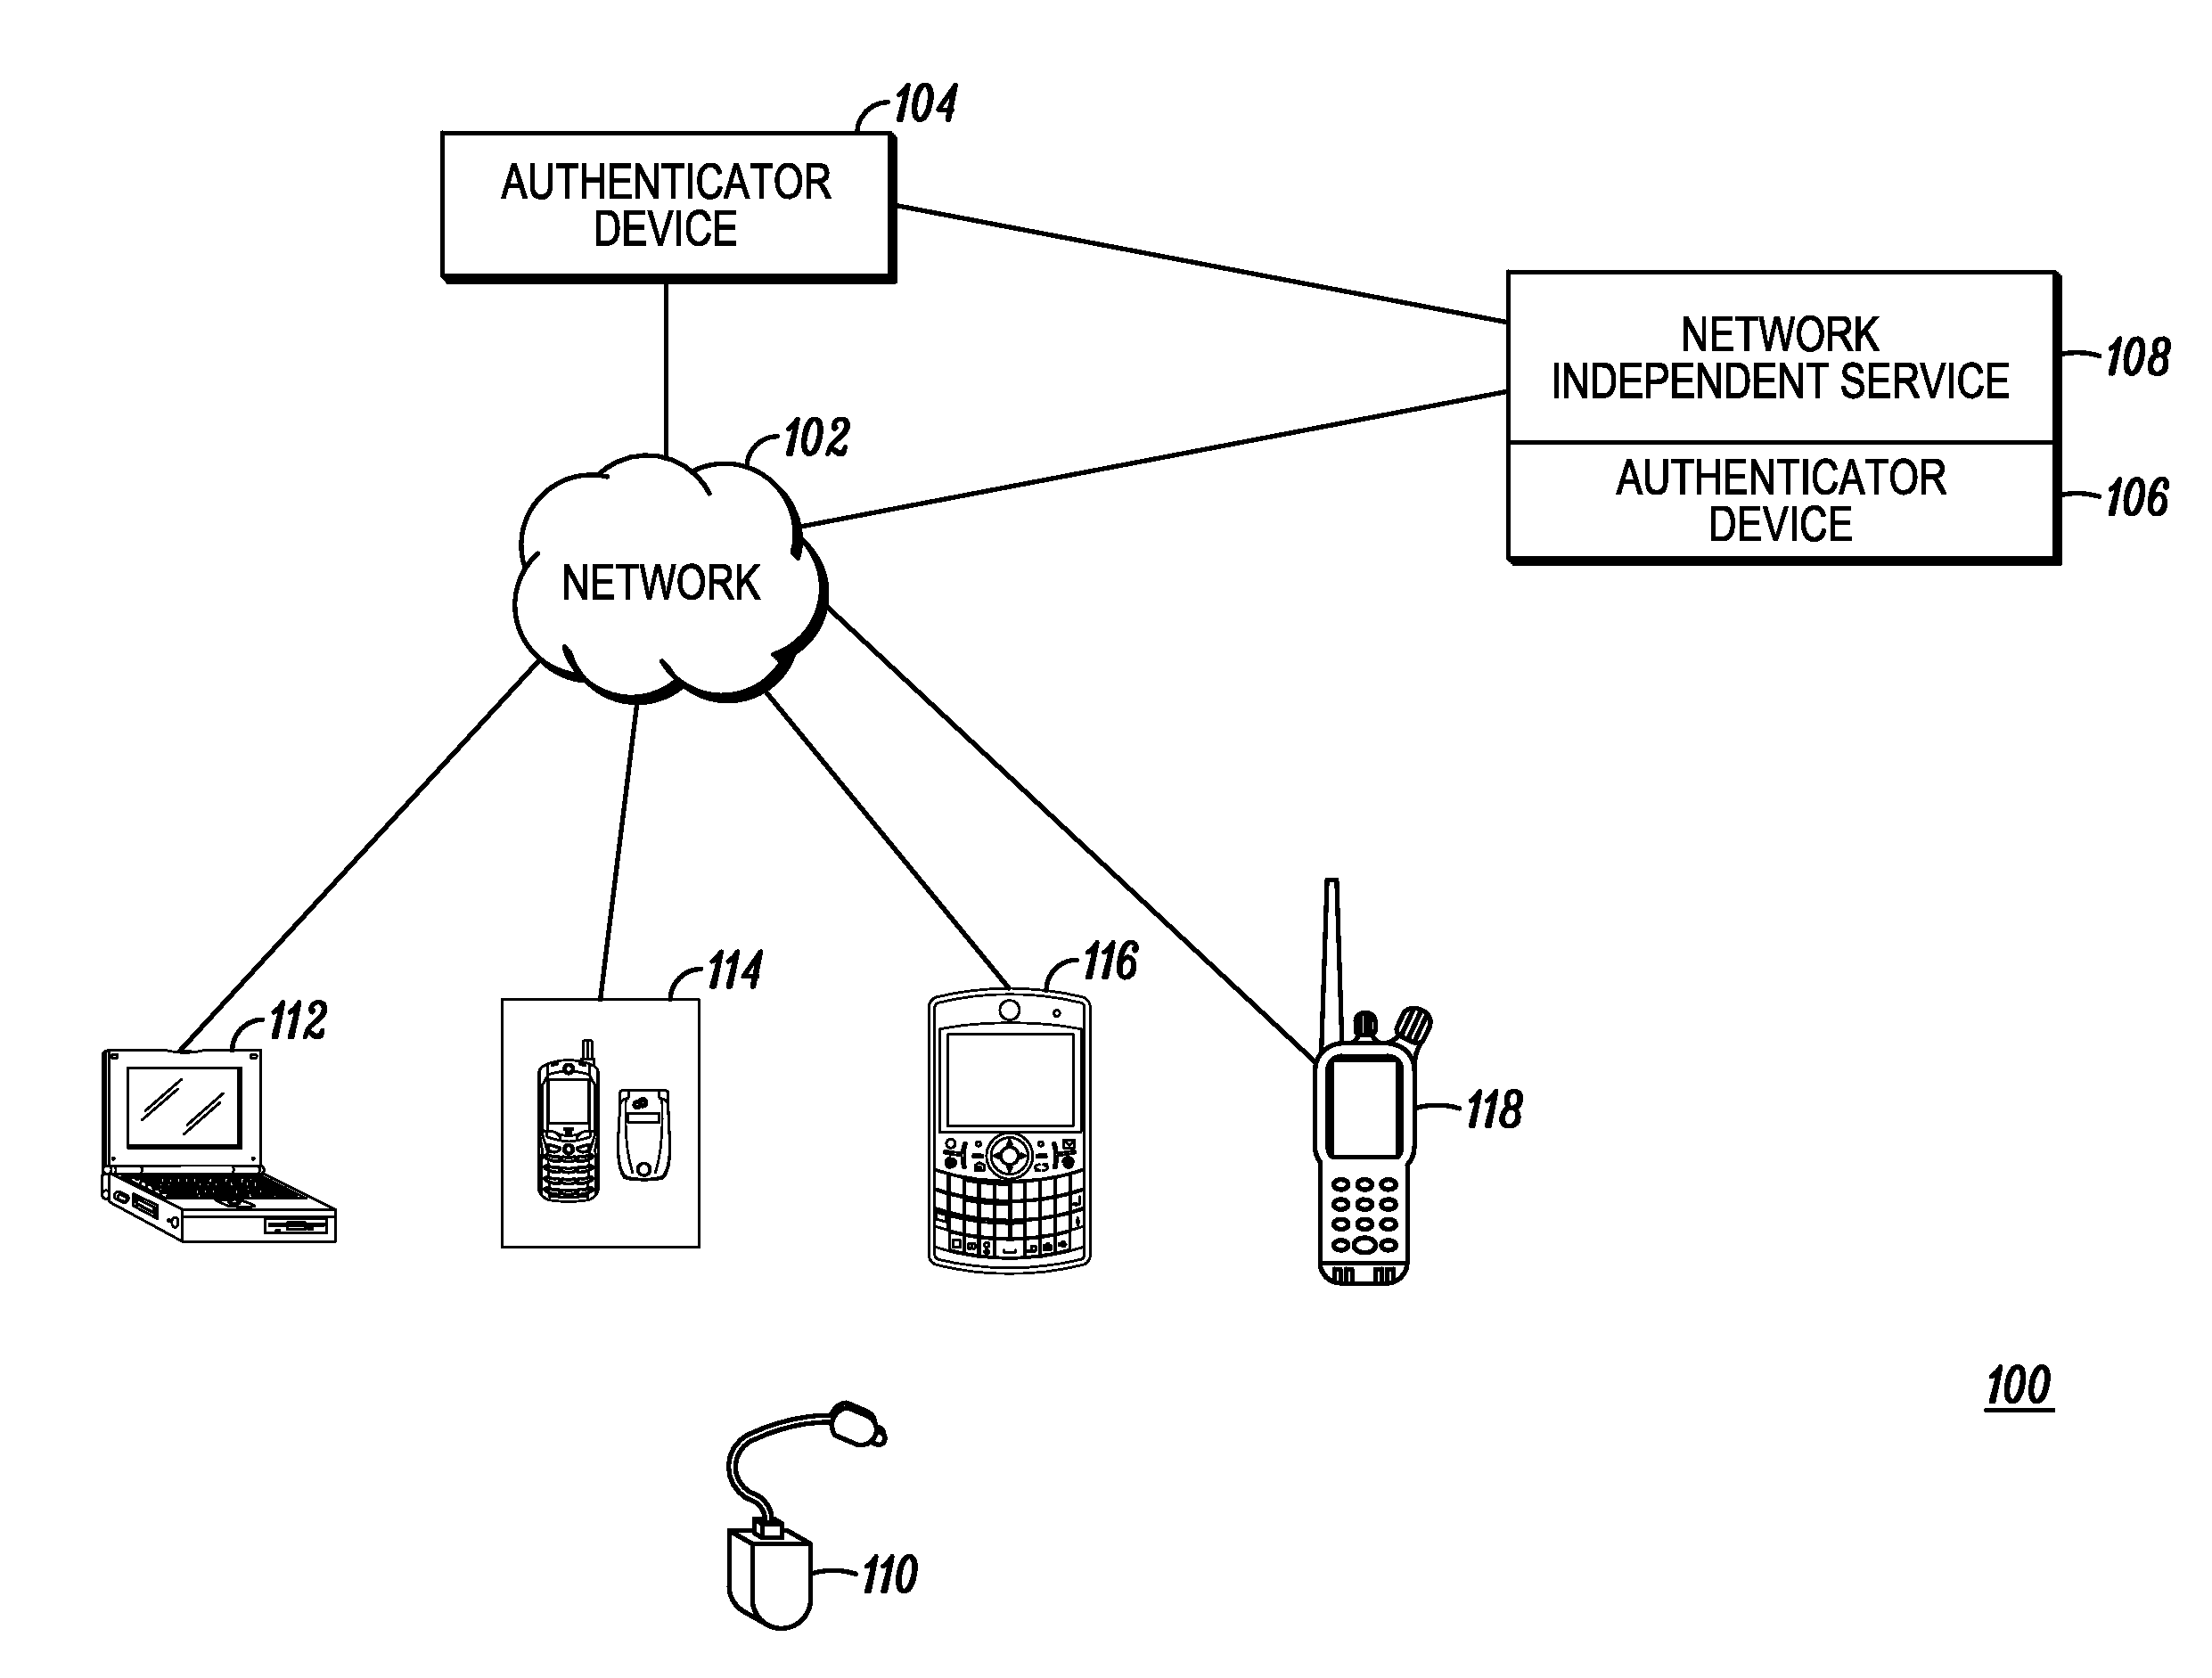 Methods for authentication using near-field